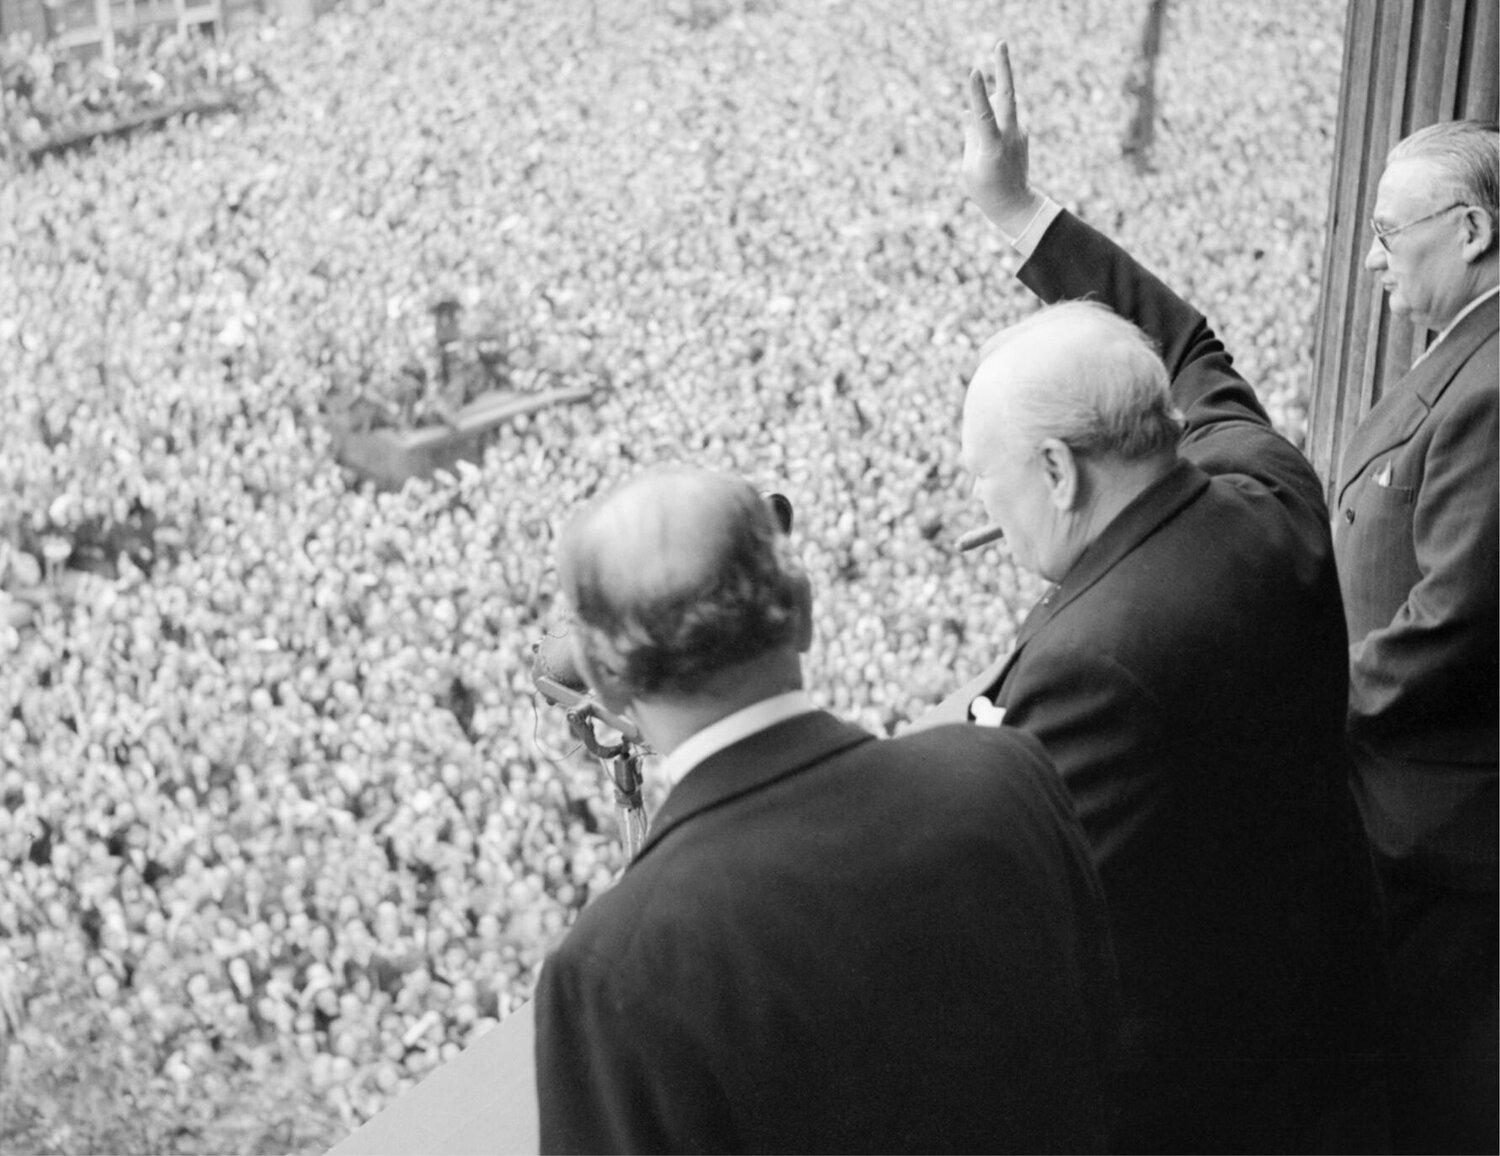 Winston Churchill waves to crowds in Whitehall, in London, as they celebrate VE Day, 8 May 1945. From the balcony of the Ministry of Health, Prime Minister Winston Churchill gives his famous 'V for Victory' sign to crowds in Whitehall on the day he broadcast to the nation that the war with Germany had been won, 8 May 1945 (VE Day). To Churchill's left is Sir John Anderson, the Chancellor of the Exchequer. To Churchill's right is Ernest Bevin, the Minister of Labour. (Public Domain)